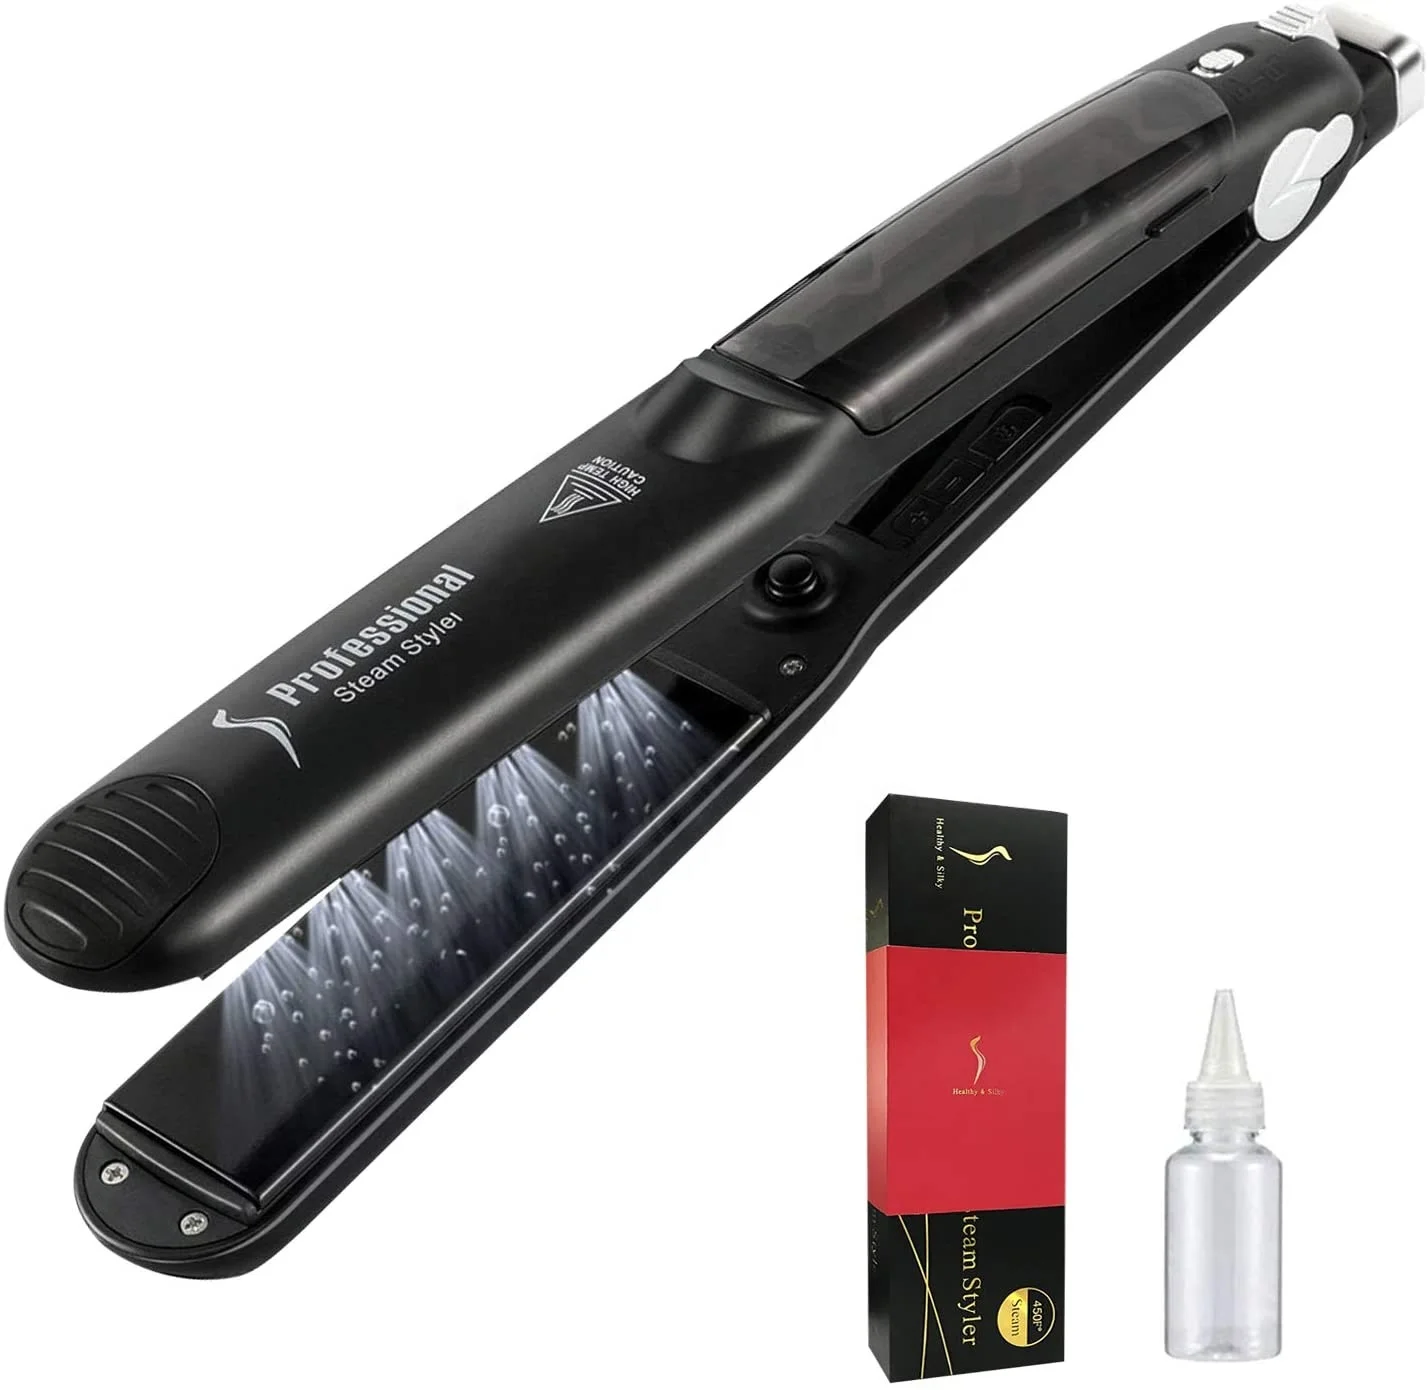 Hair straighteners with steam фото 88